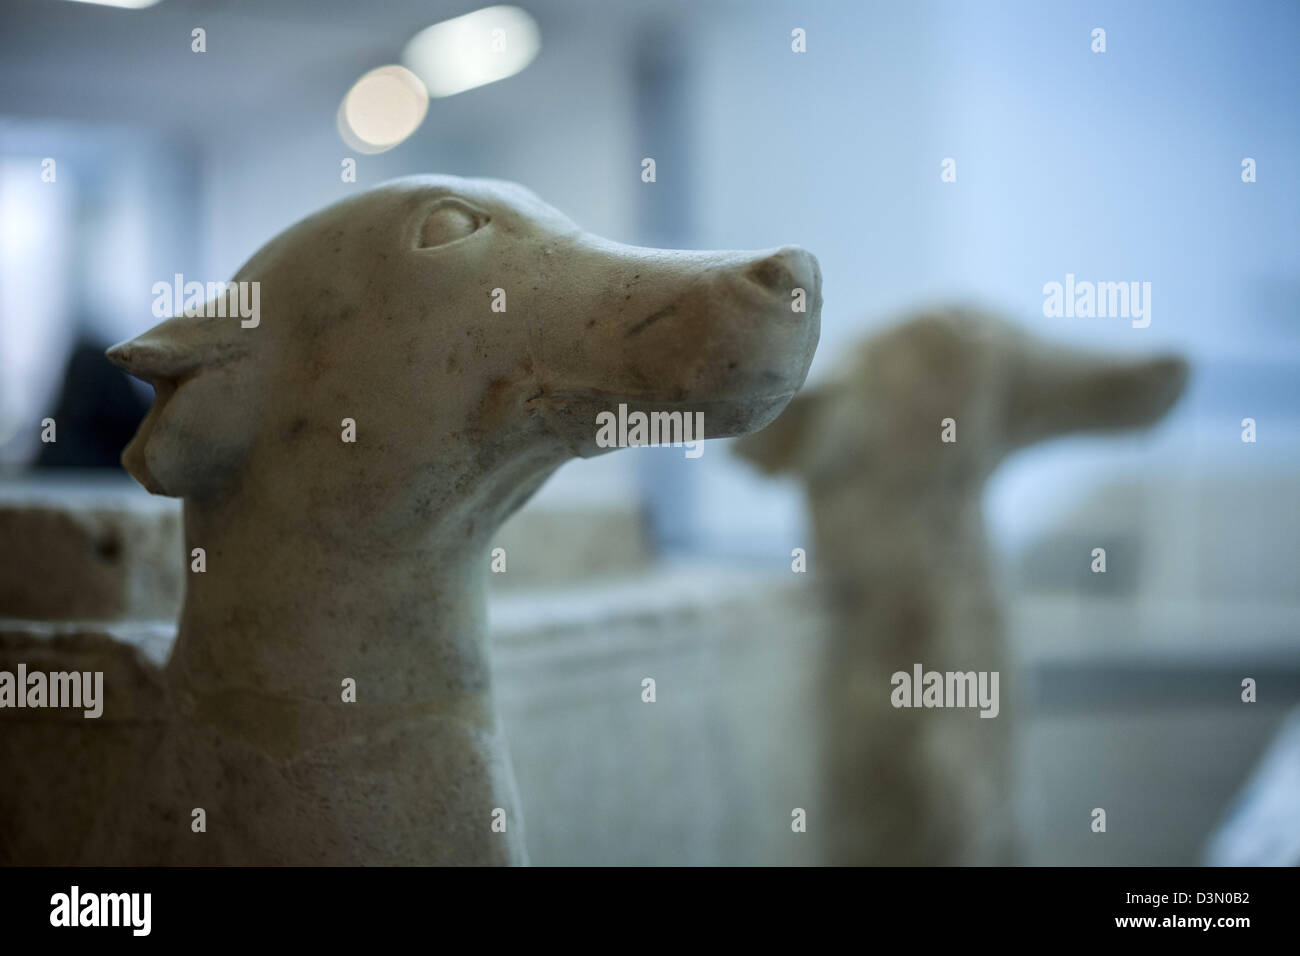 Ancient sculpture of dogs on display in the Capitoline museum in Rome Italy Stock Photo